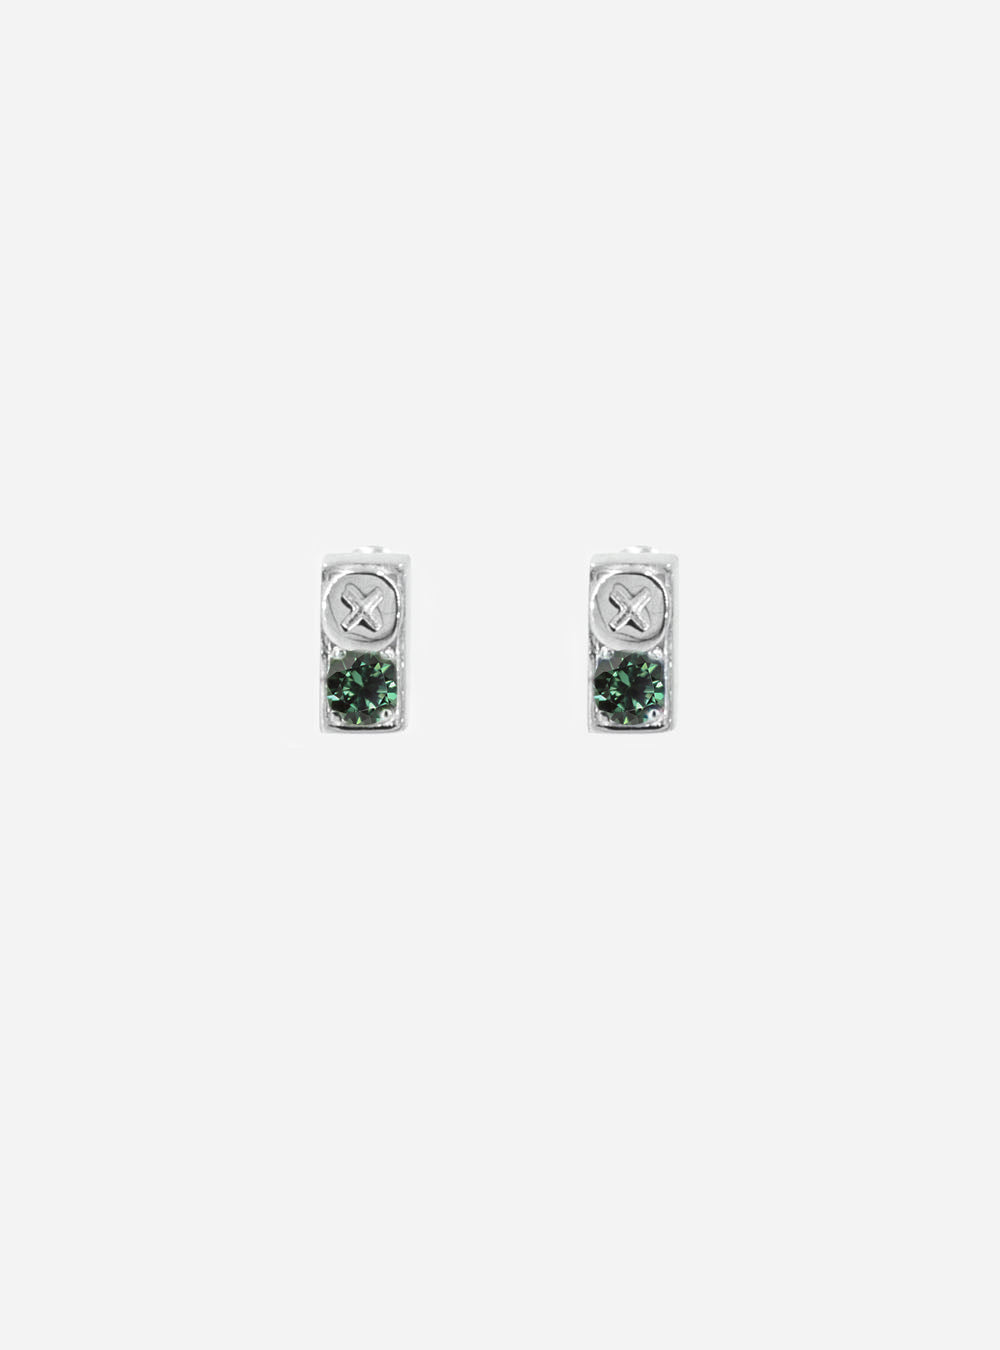 a pair of MIDNIGHTFACTORY Screwbox spinel earrings with green stones.